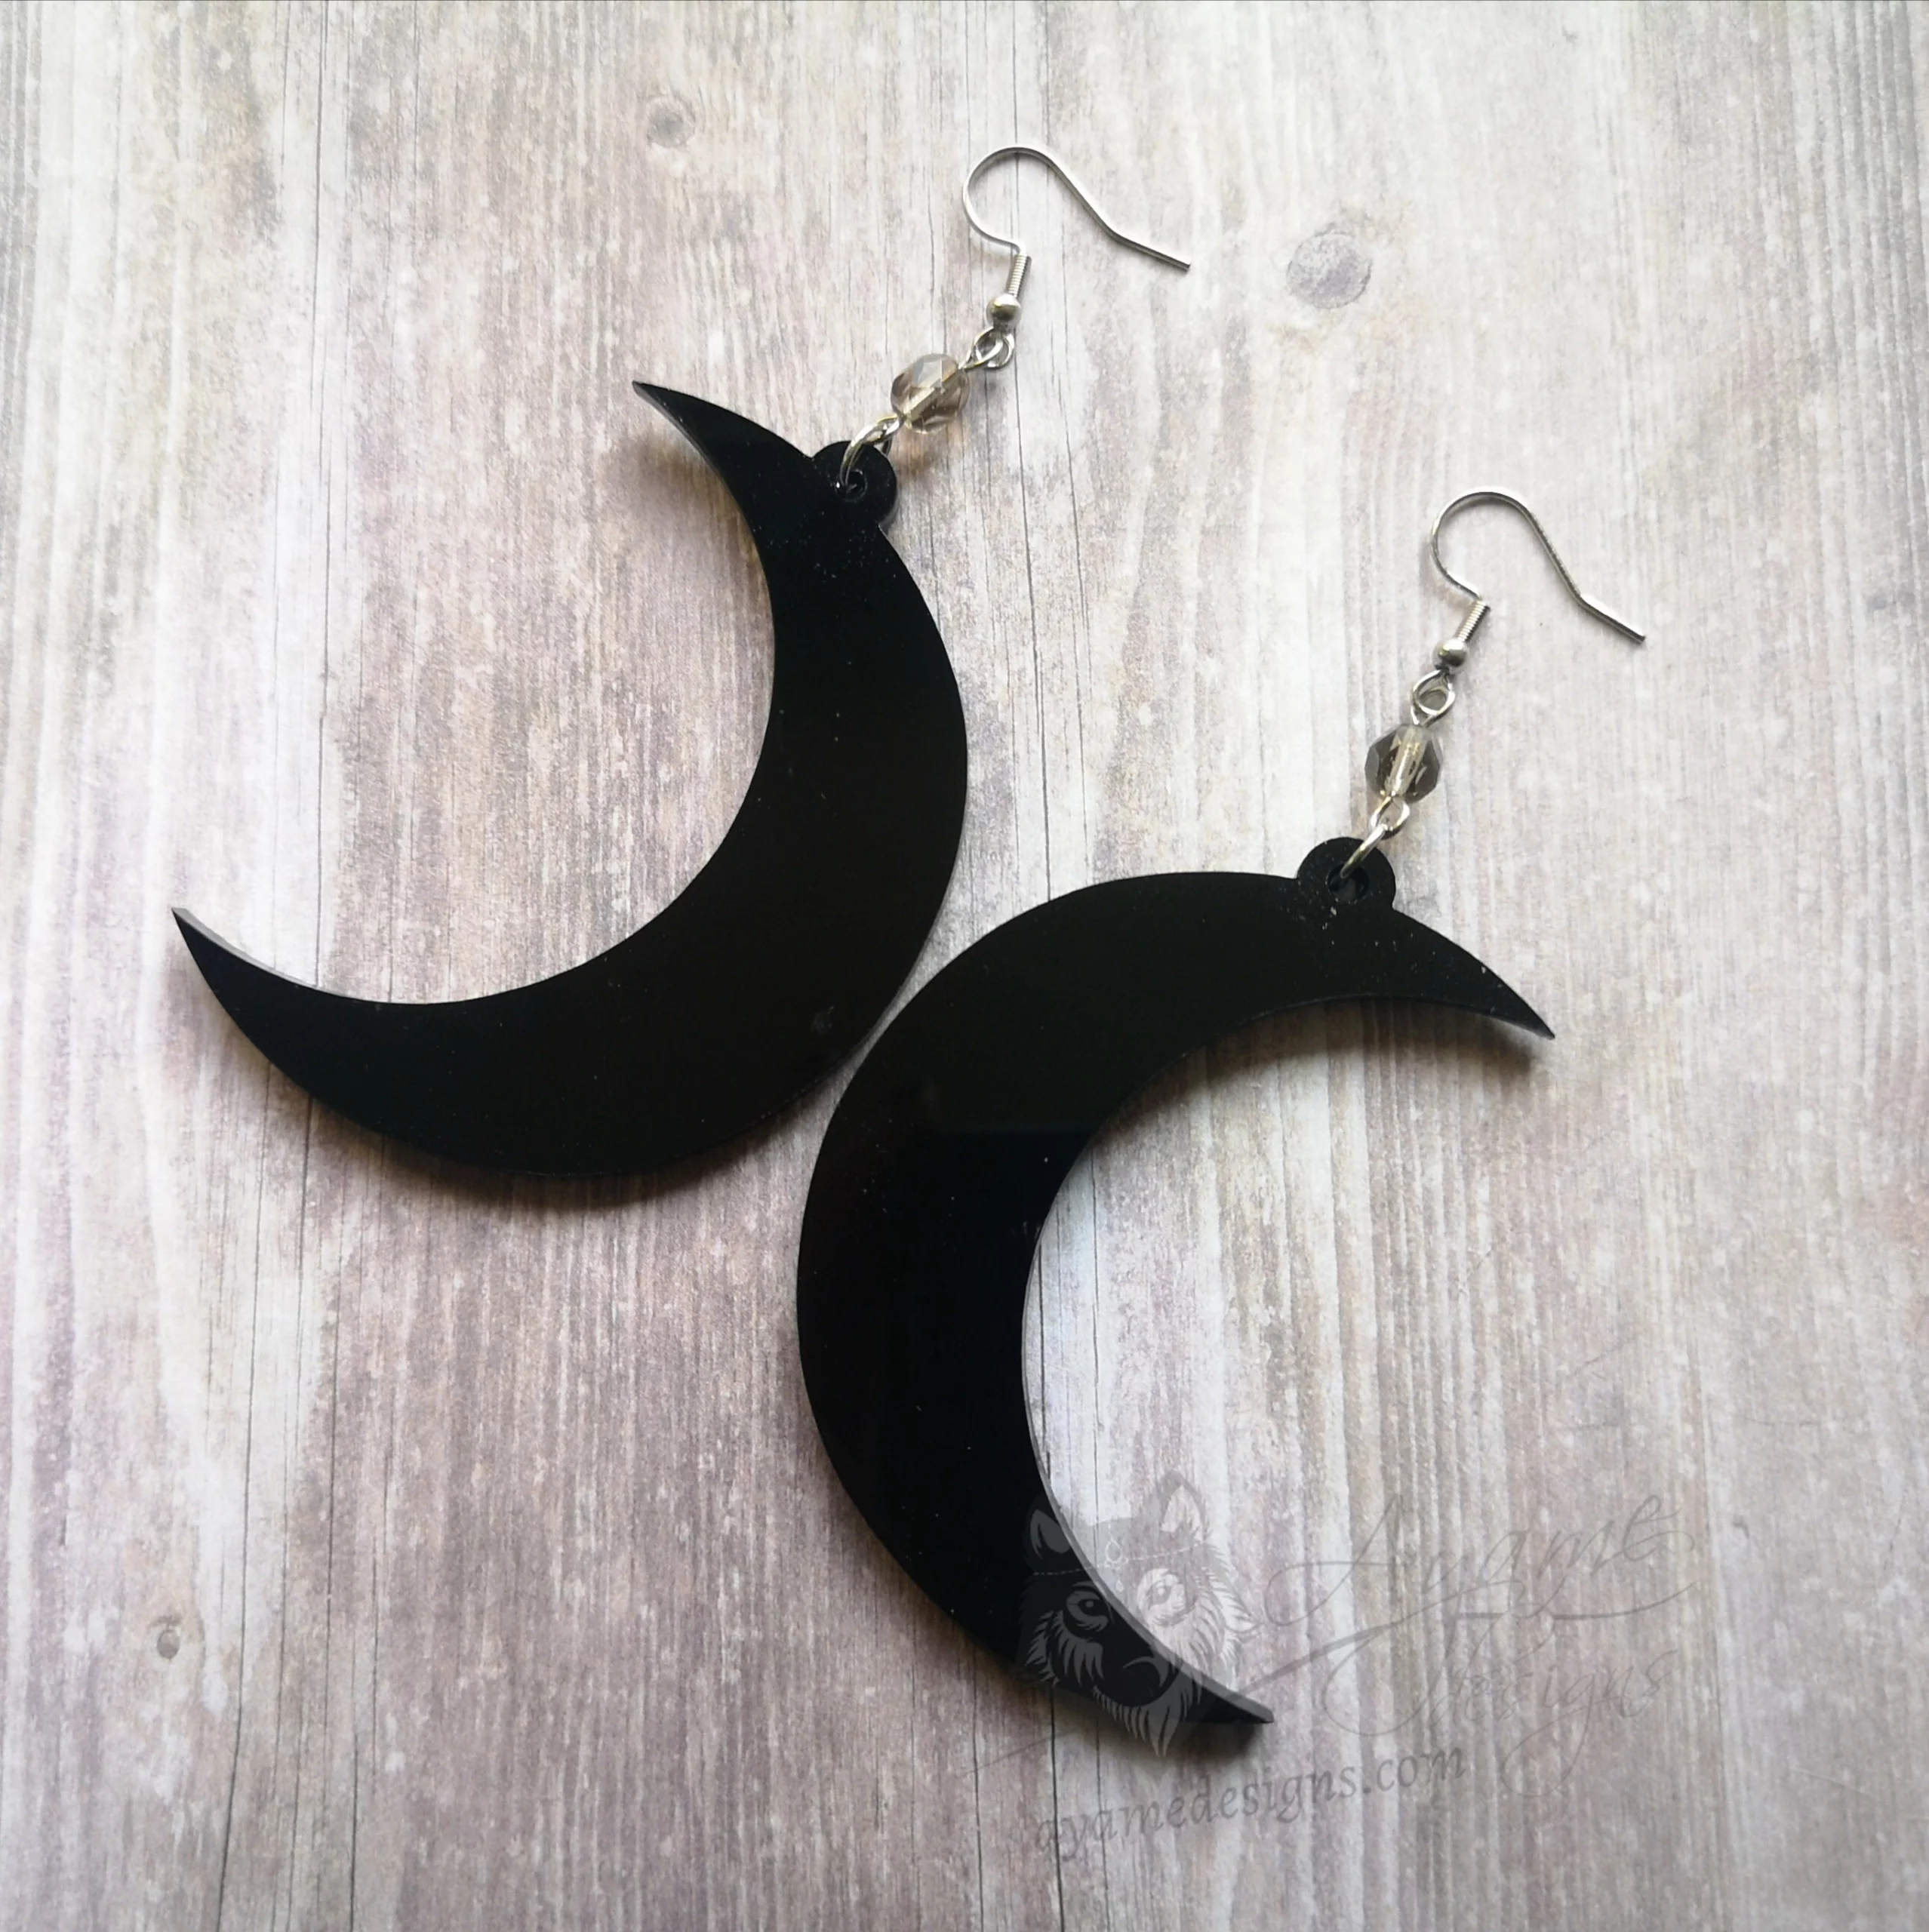 Handmade gothic earrings with laser cut perspex crescent moon pendants, grey Czech crystal beads and stainless steel earring hooks